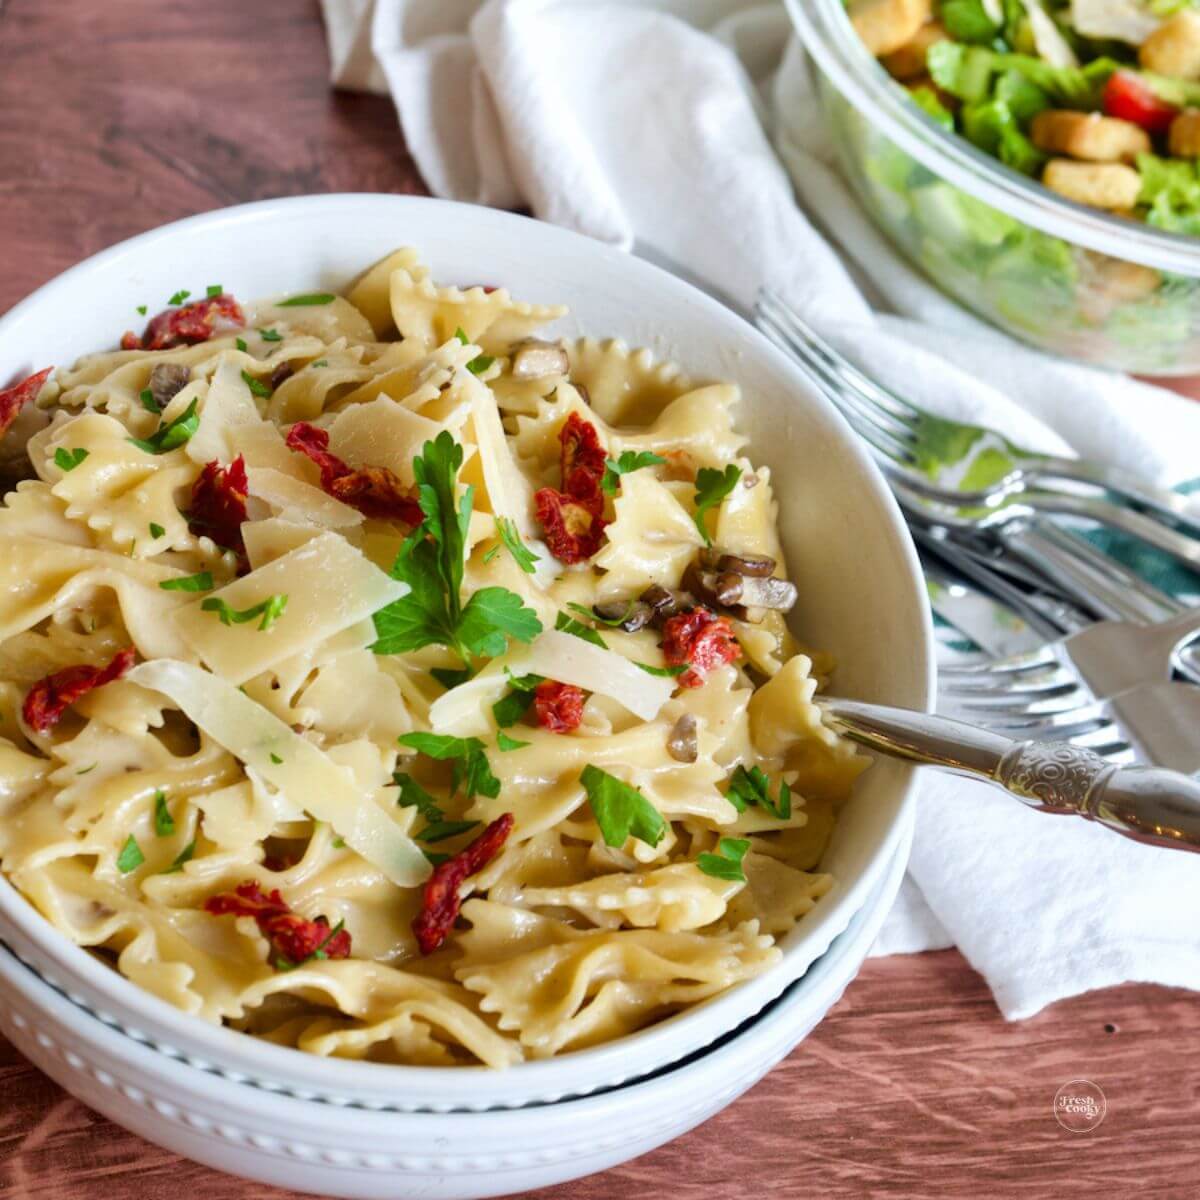 Creamy bow-tie pasta in pasta bowls with Italian salad behind.